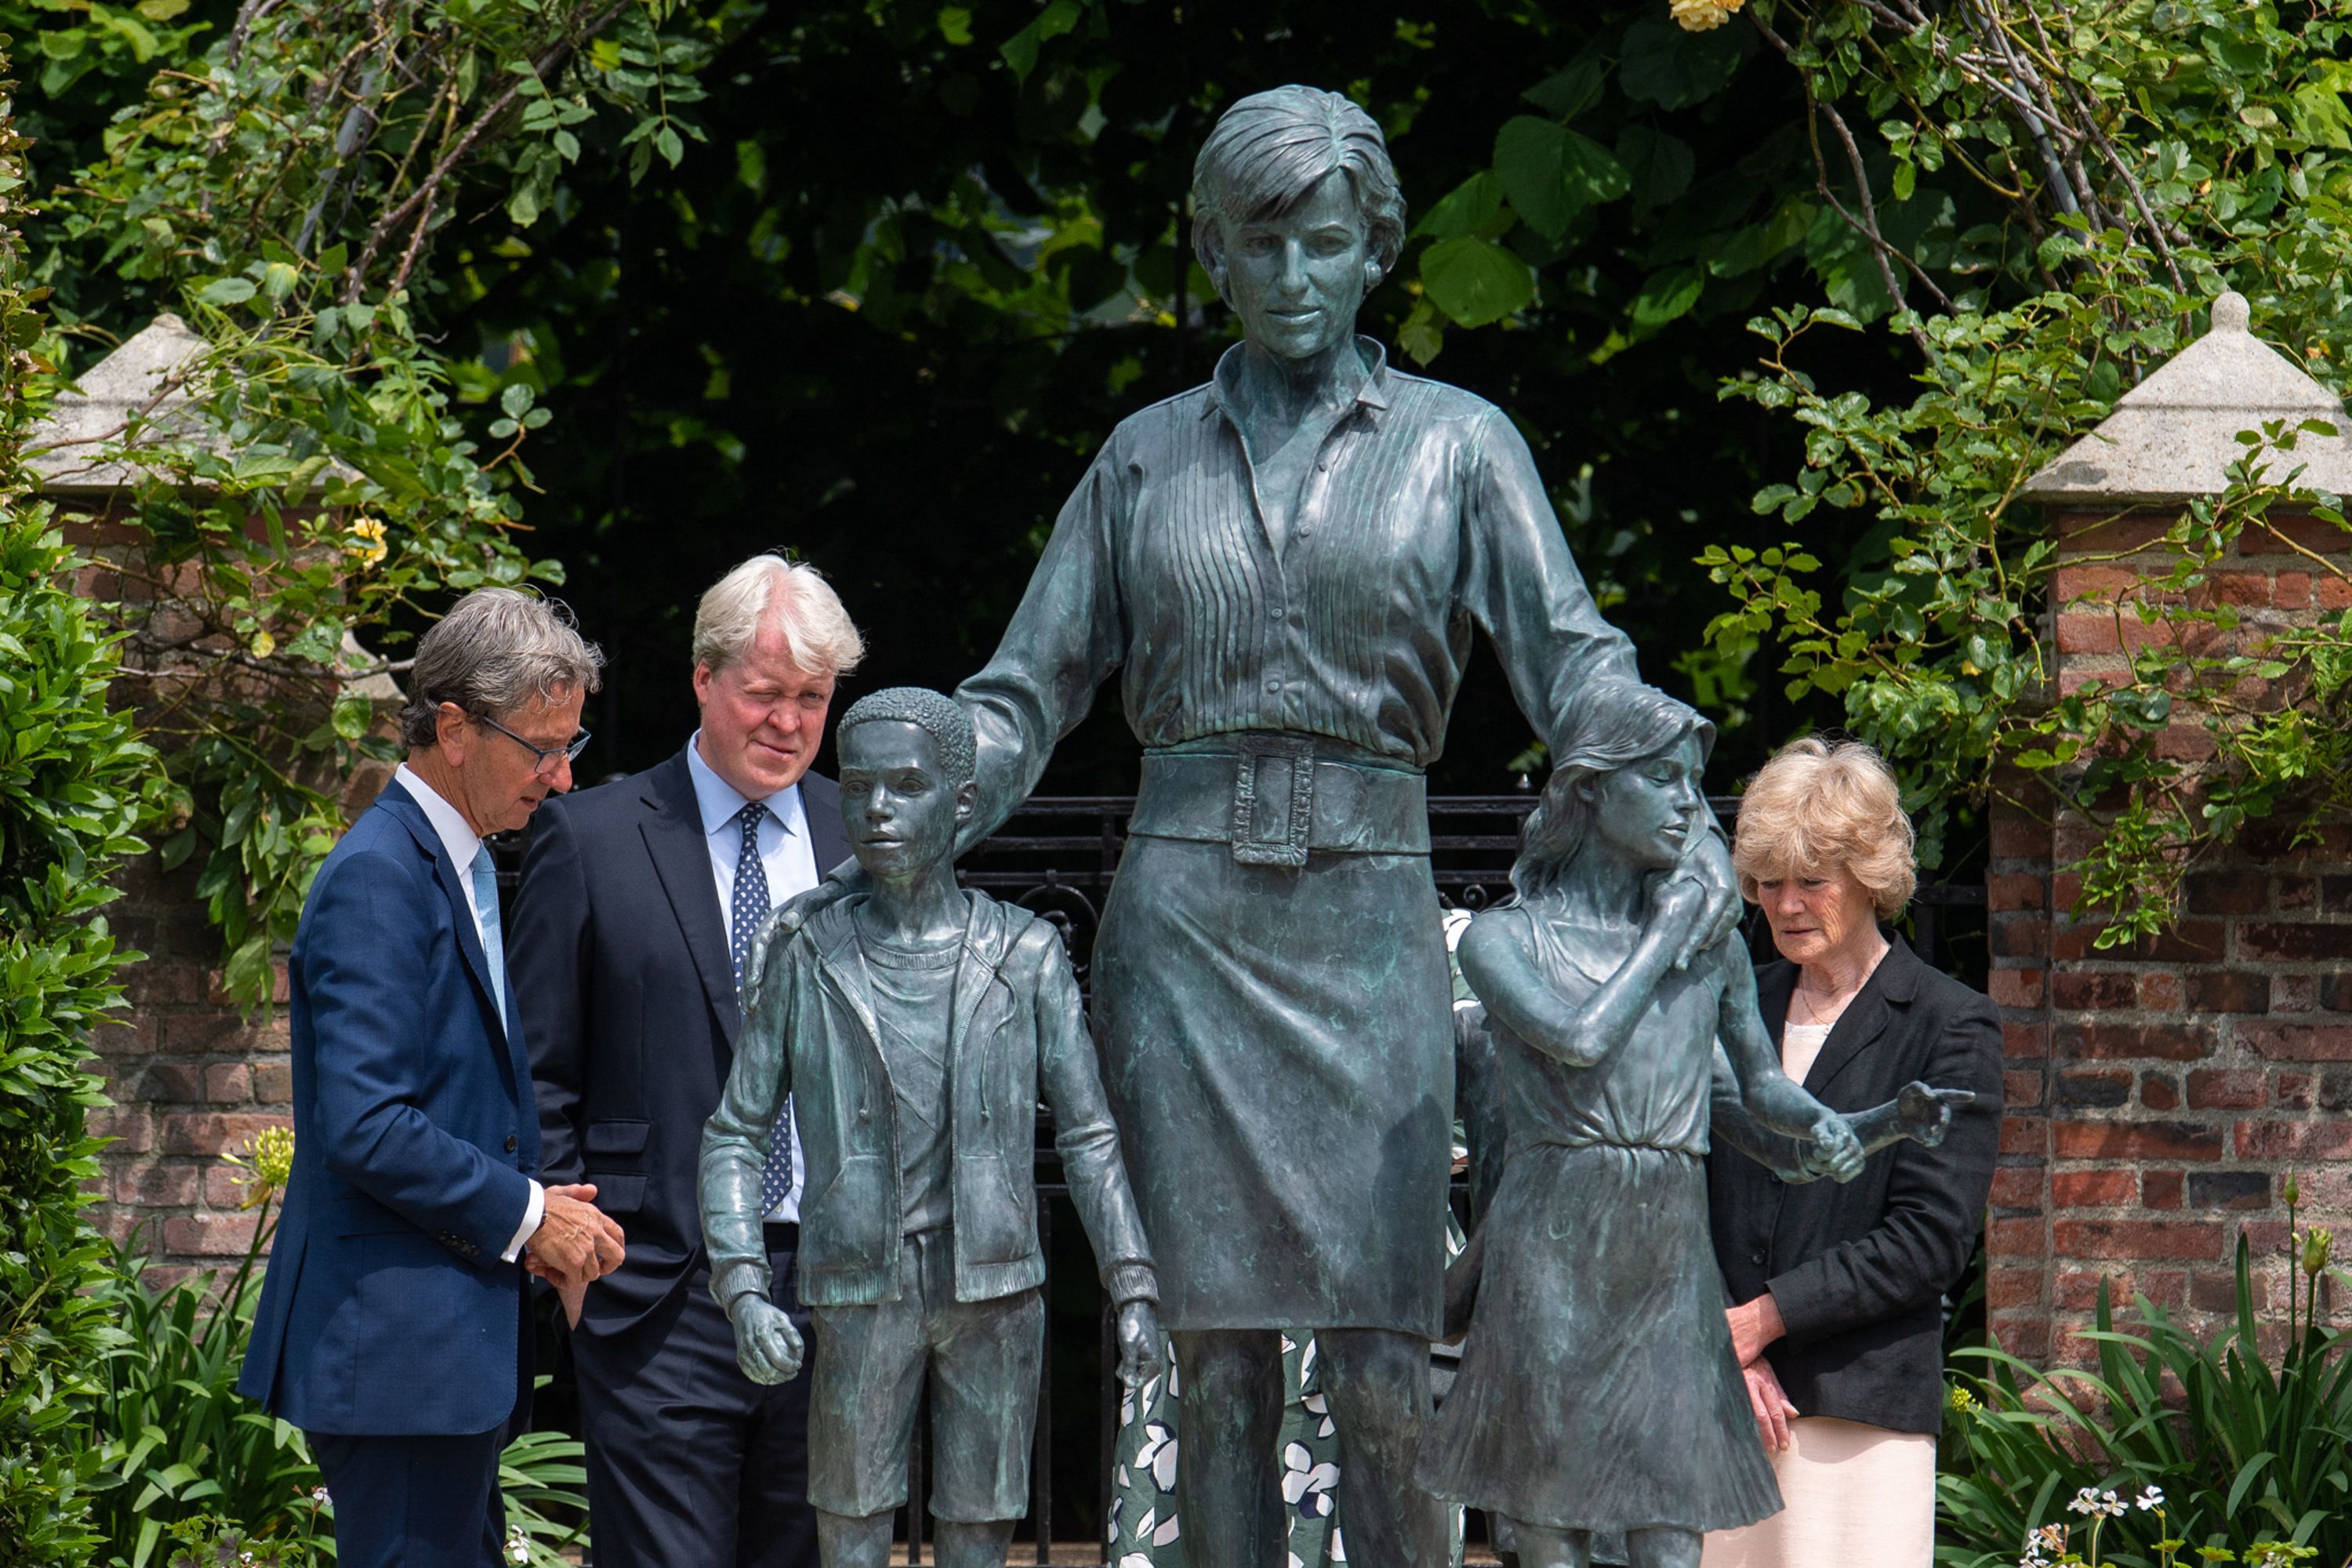 The earl was alongside the princes when they unveiled a statue to their mother at Kensington Palace in July 2021, an event he described as “a good day”